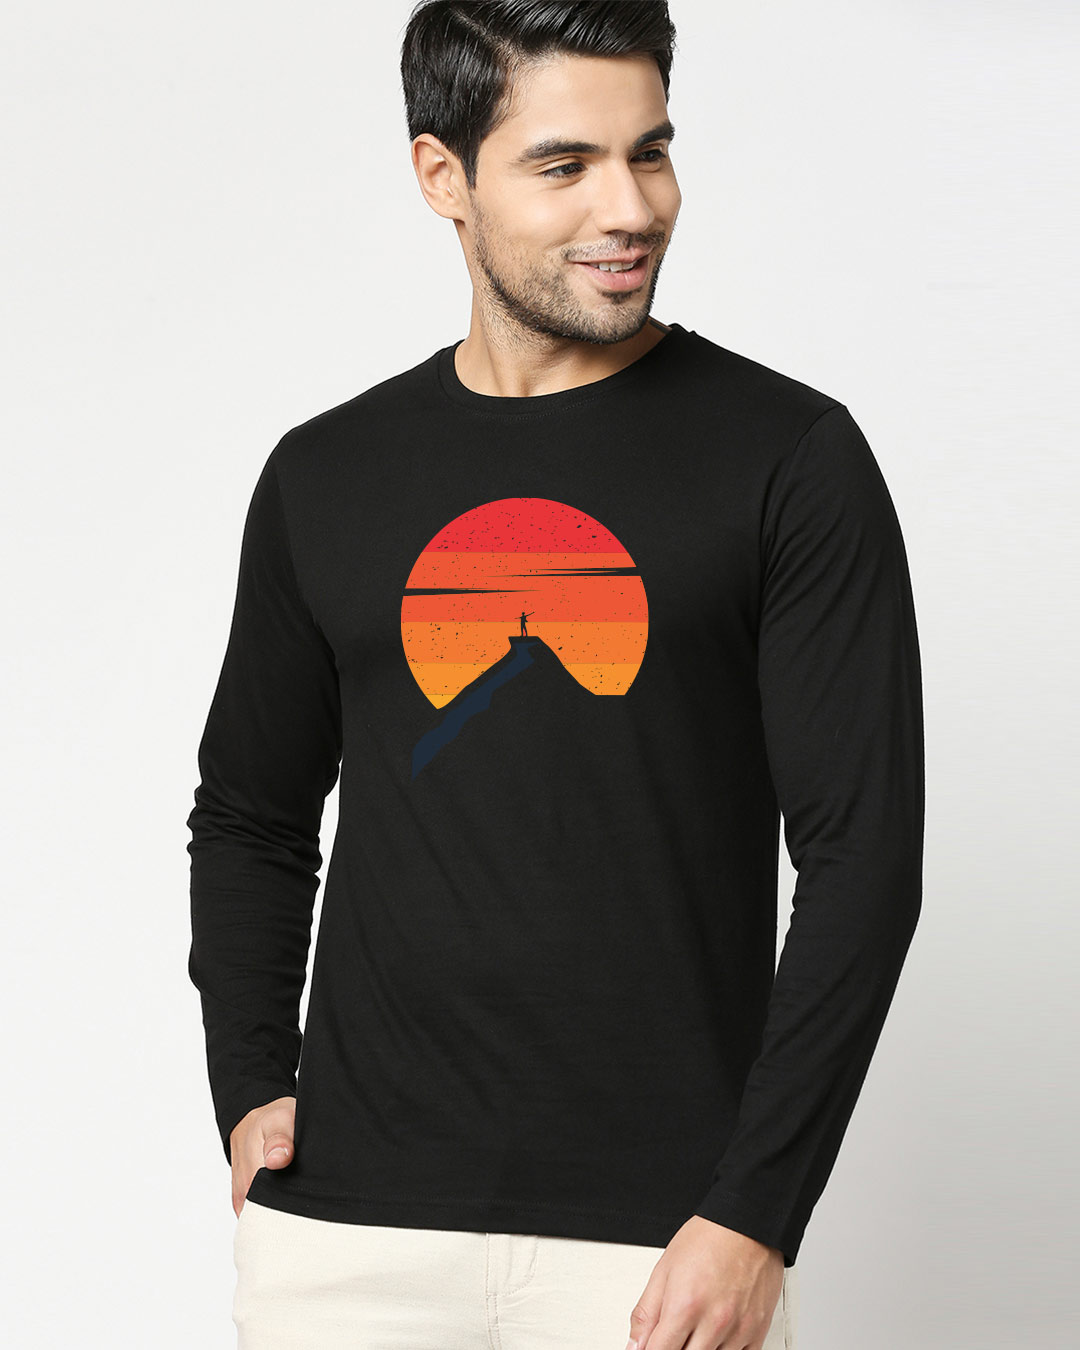 Shop The Best View Full Sleeve T-Shirt Black-Back